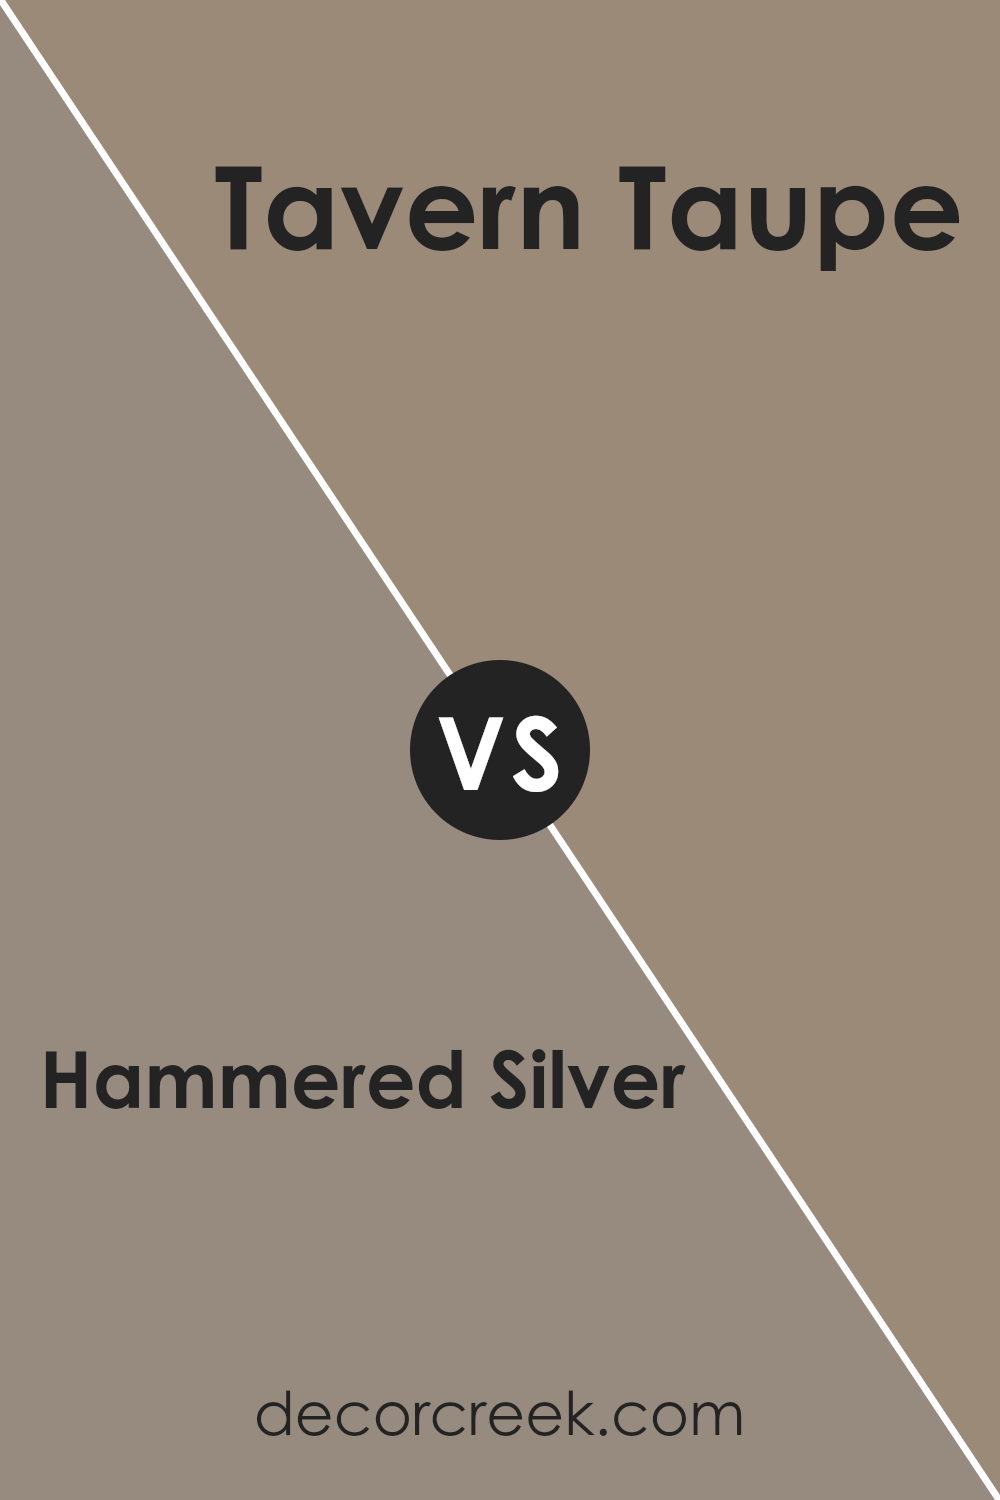 hammered_silver_sw_2840_vs_tavern_taupe_sw_7508